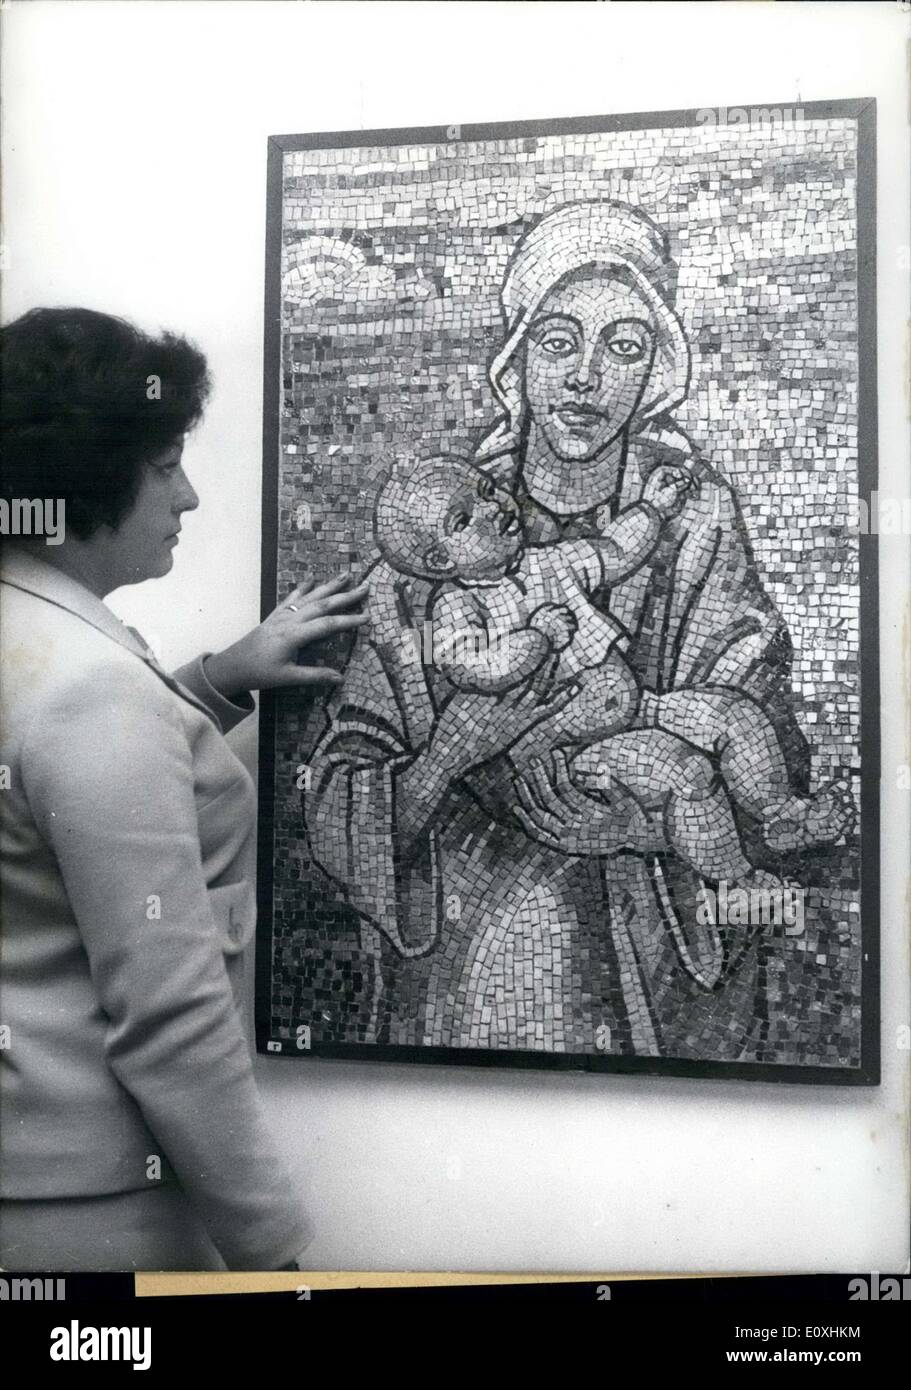 Oct. 20, 1966 - A collection of long forgotten mosaics by German expressionists was exhibited at the roof garden gallery in Berlin's Europa-Center. Works from artists like Pechstein, Cesar Klein, Ludwig Giess, and Otto Freundlich were shown. Pictured here is a work by Max Pechstein called ''Madonna mit Kind'' from 1926. Stock Photo